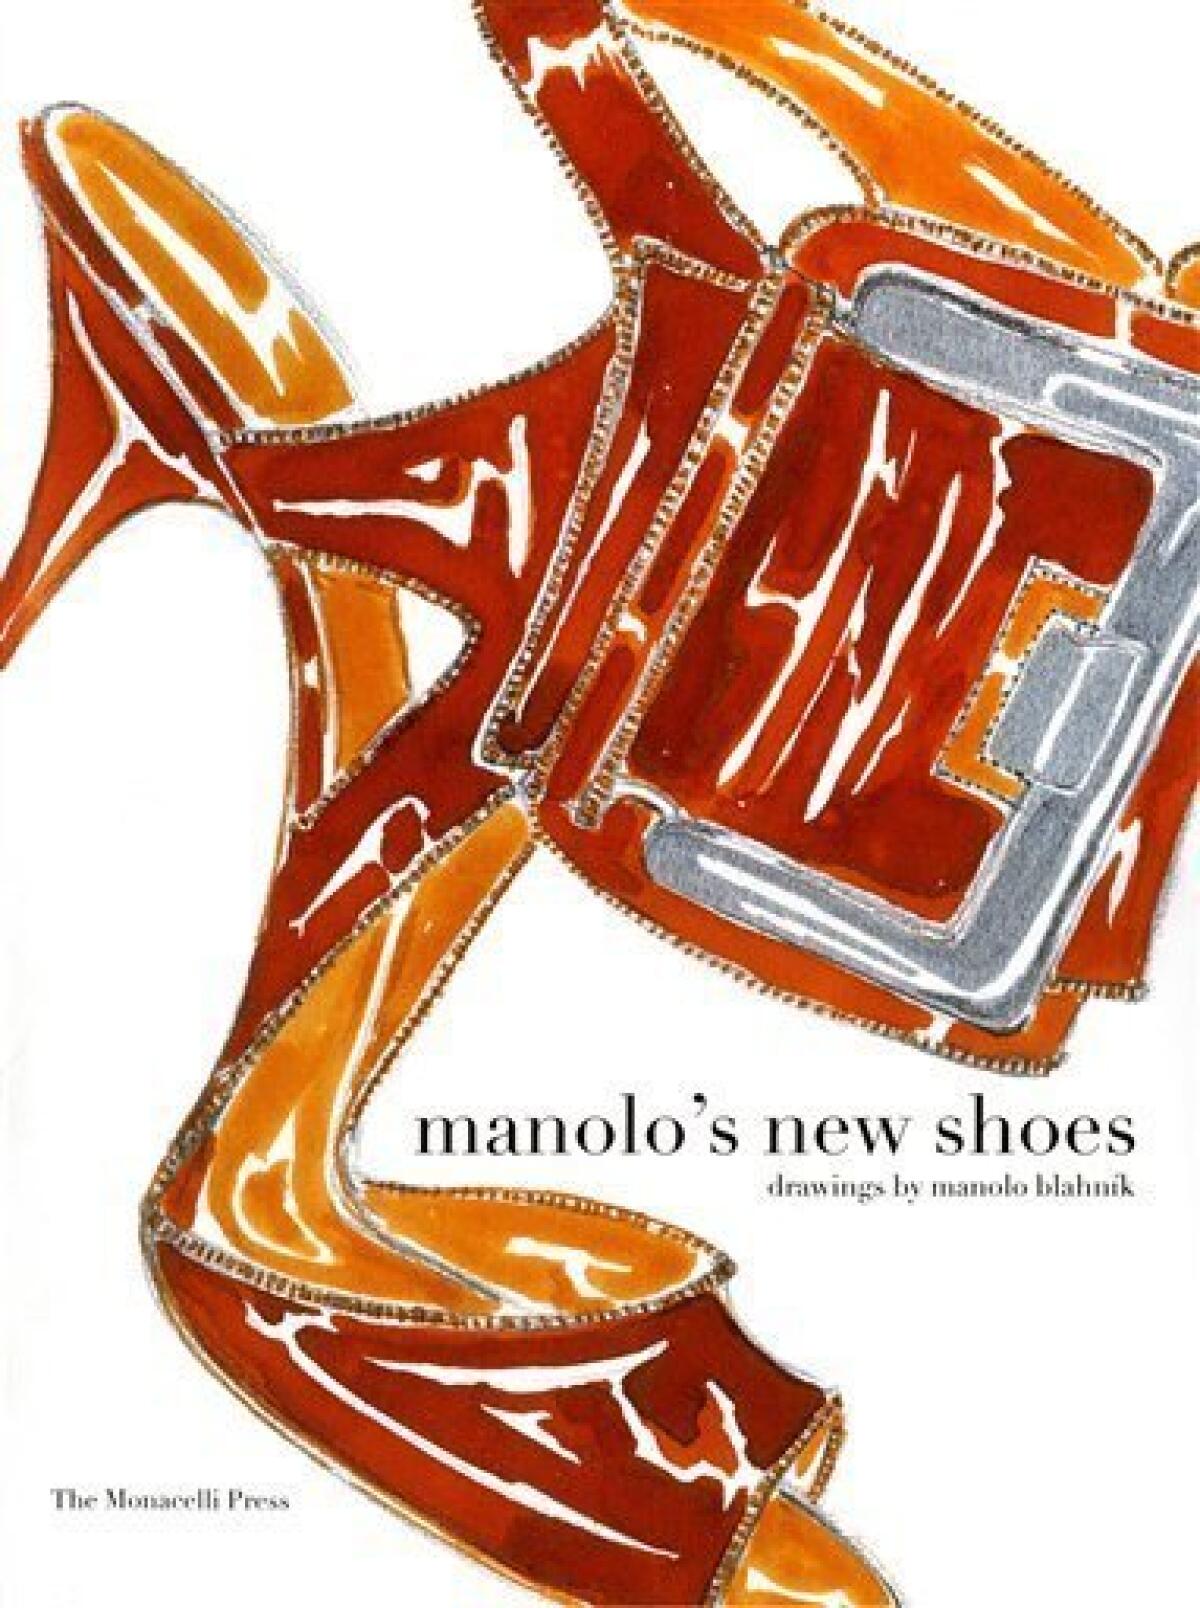 This book cover released by The Monacelli Press shows the cover of "Manolo's New Shoes," by top footwear designer Manolo Blahnik. Aside from the title of his new book, Blahnik has old-school styles on his mind. (AP Photo/The Monacelli Press) NO SALES